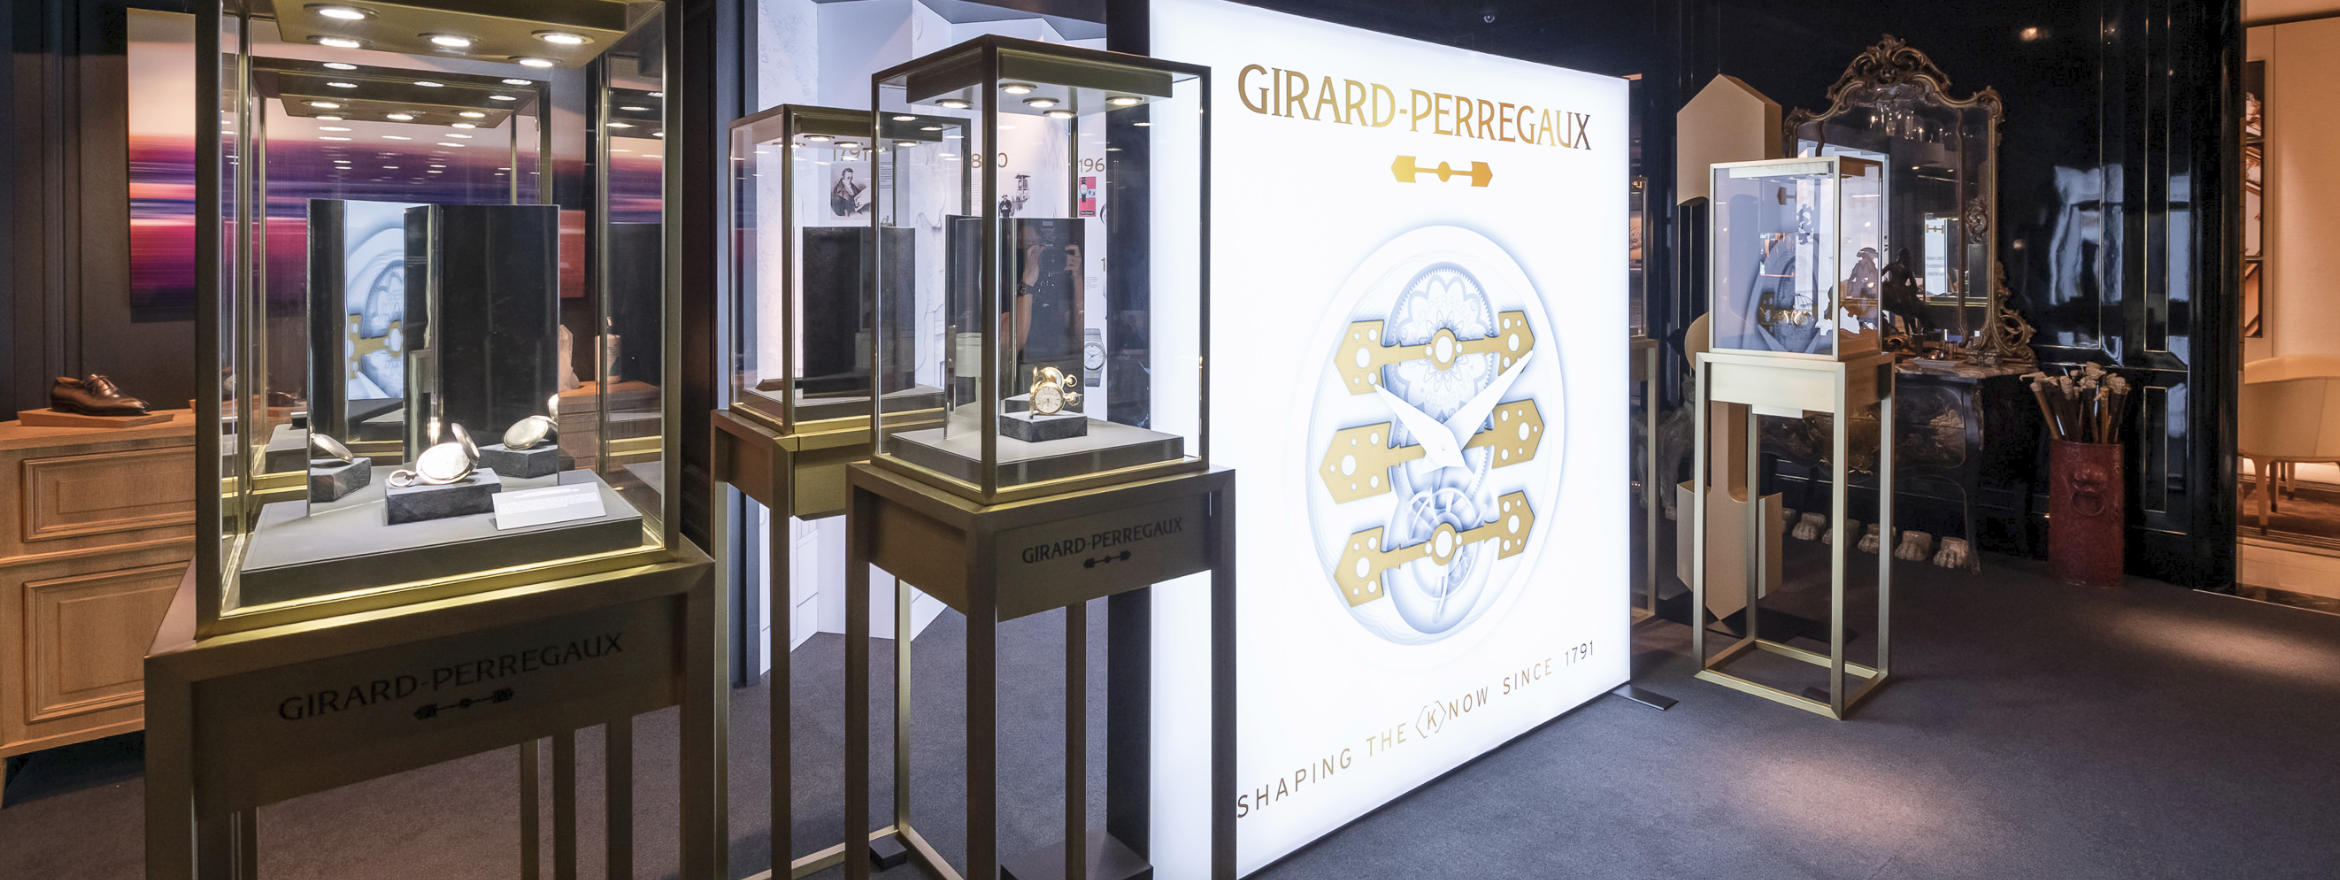 Visit Girard-Perregaux Exhibition “Shaping The Know Since 1791”